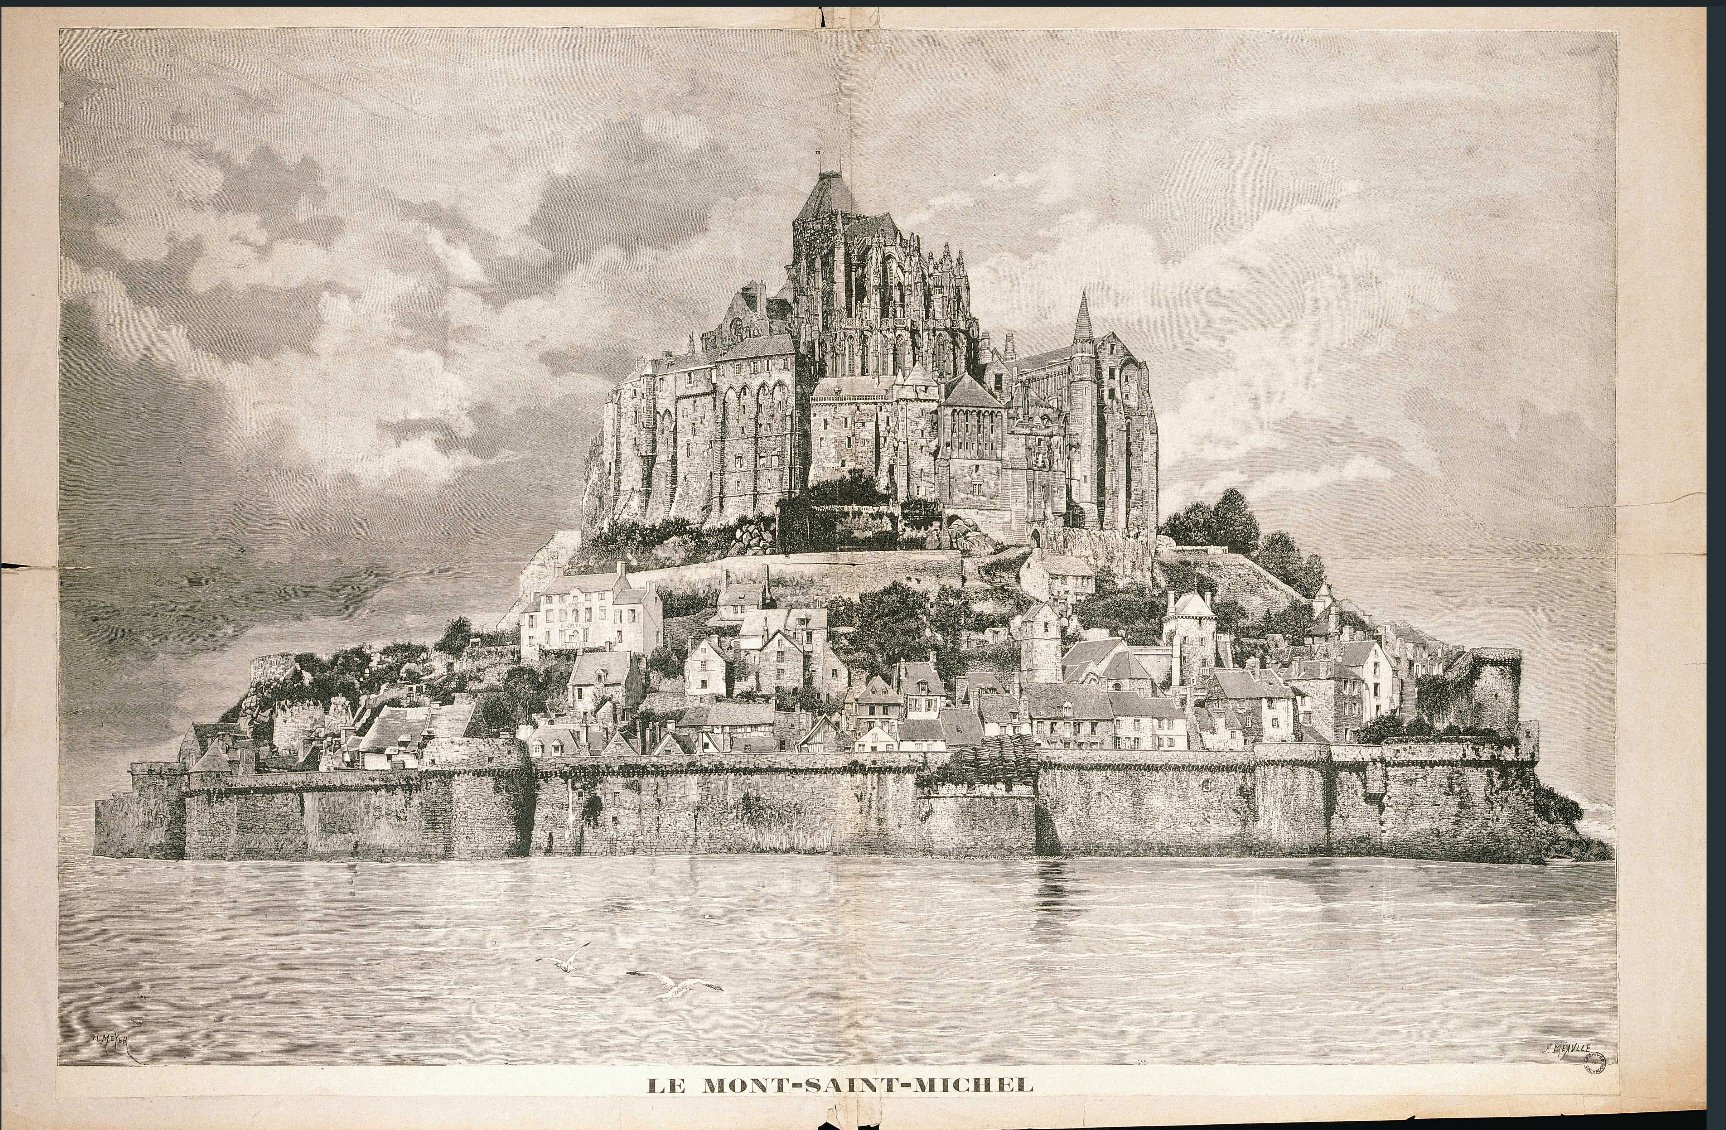 Archives départementales du Calvados, Le Mont-St-Michel seen by H. Meyer and F. Meaville (1890-1910), available here
